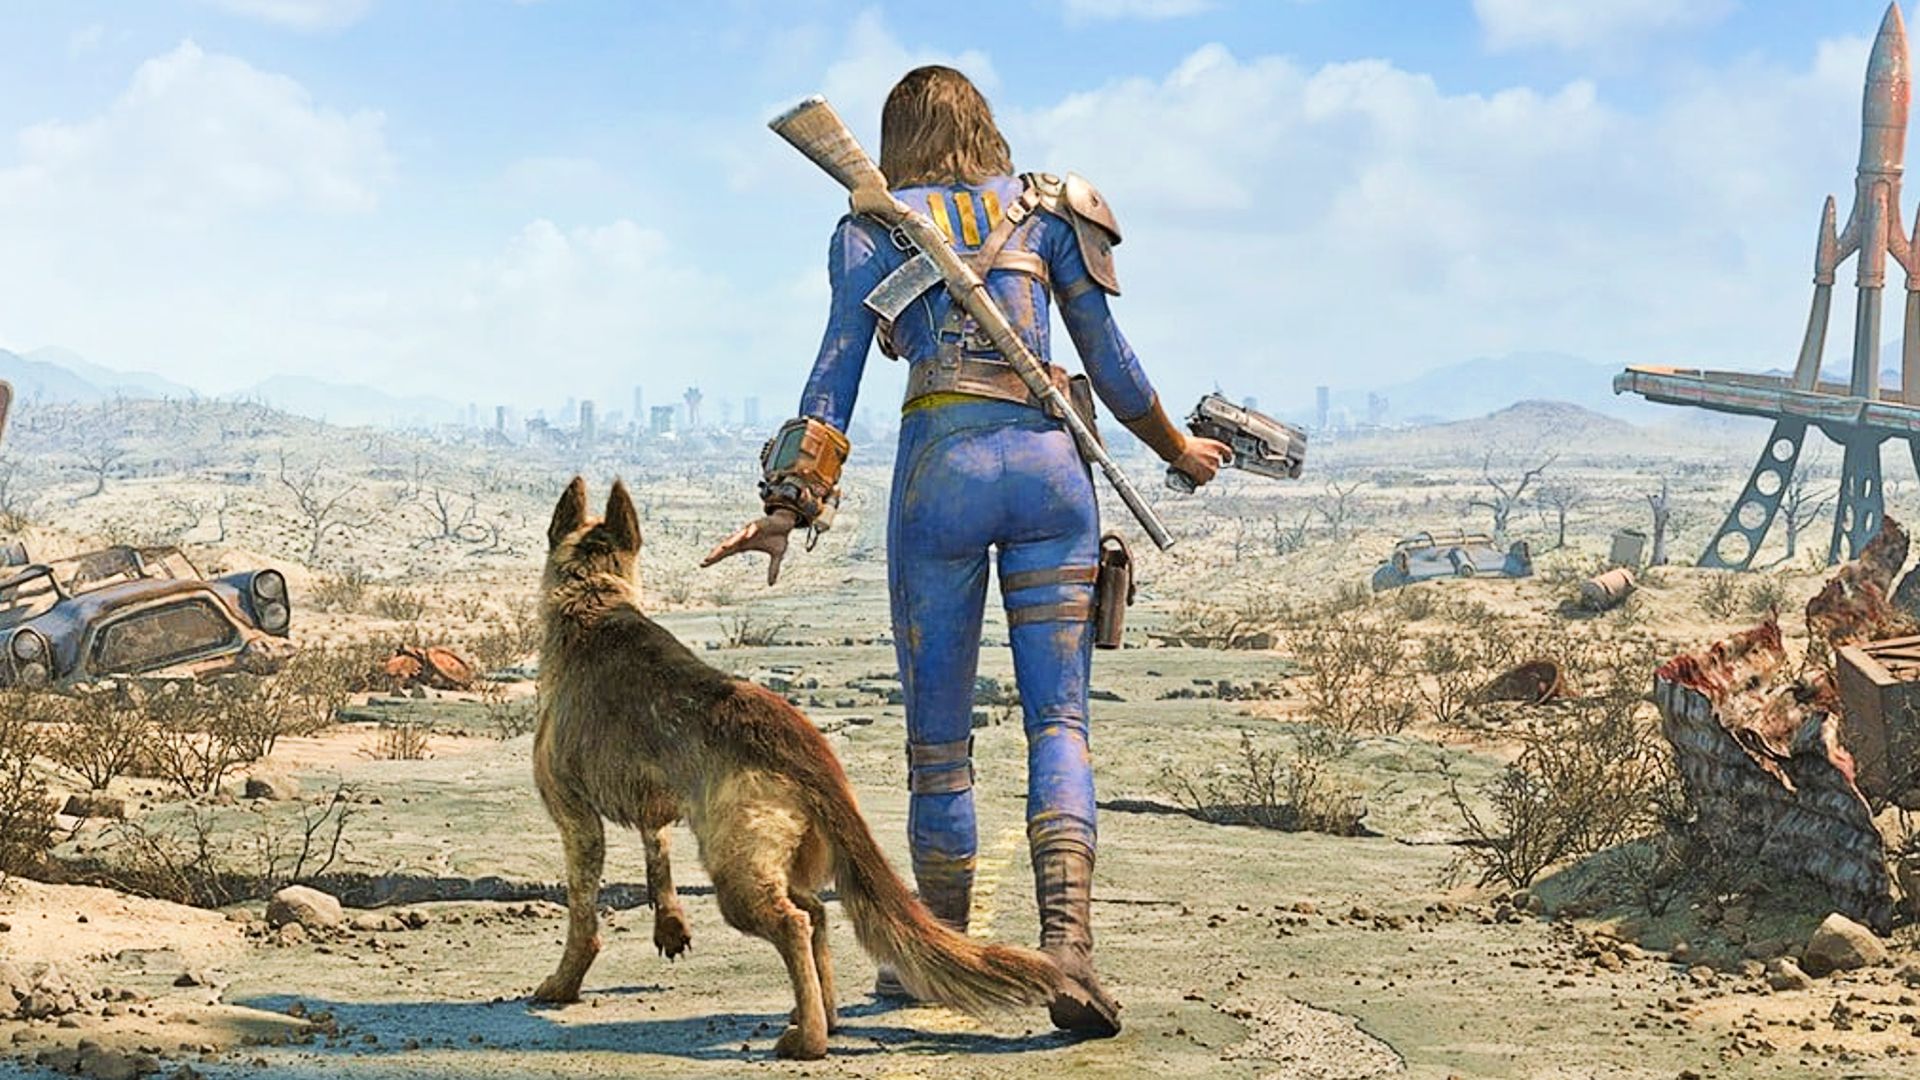 Fallout 4 Next-Gen Update: Reddit Community Explores Features and Impact